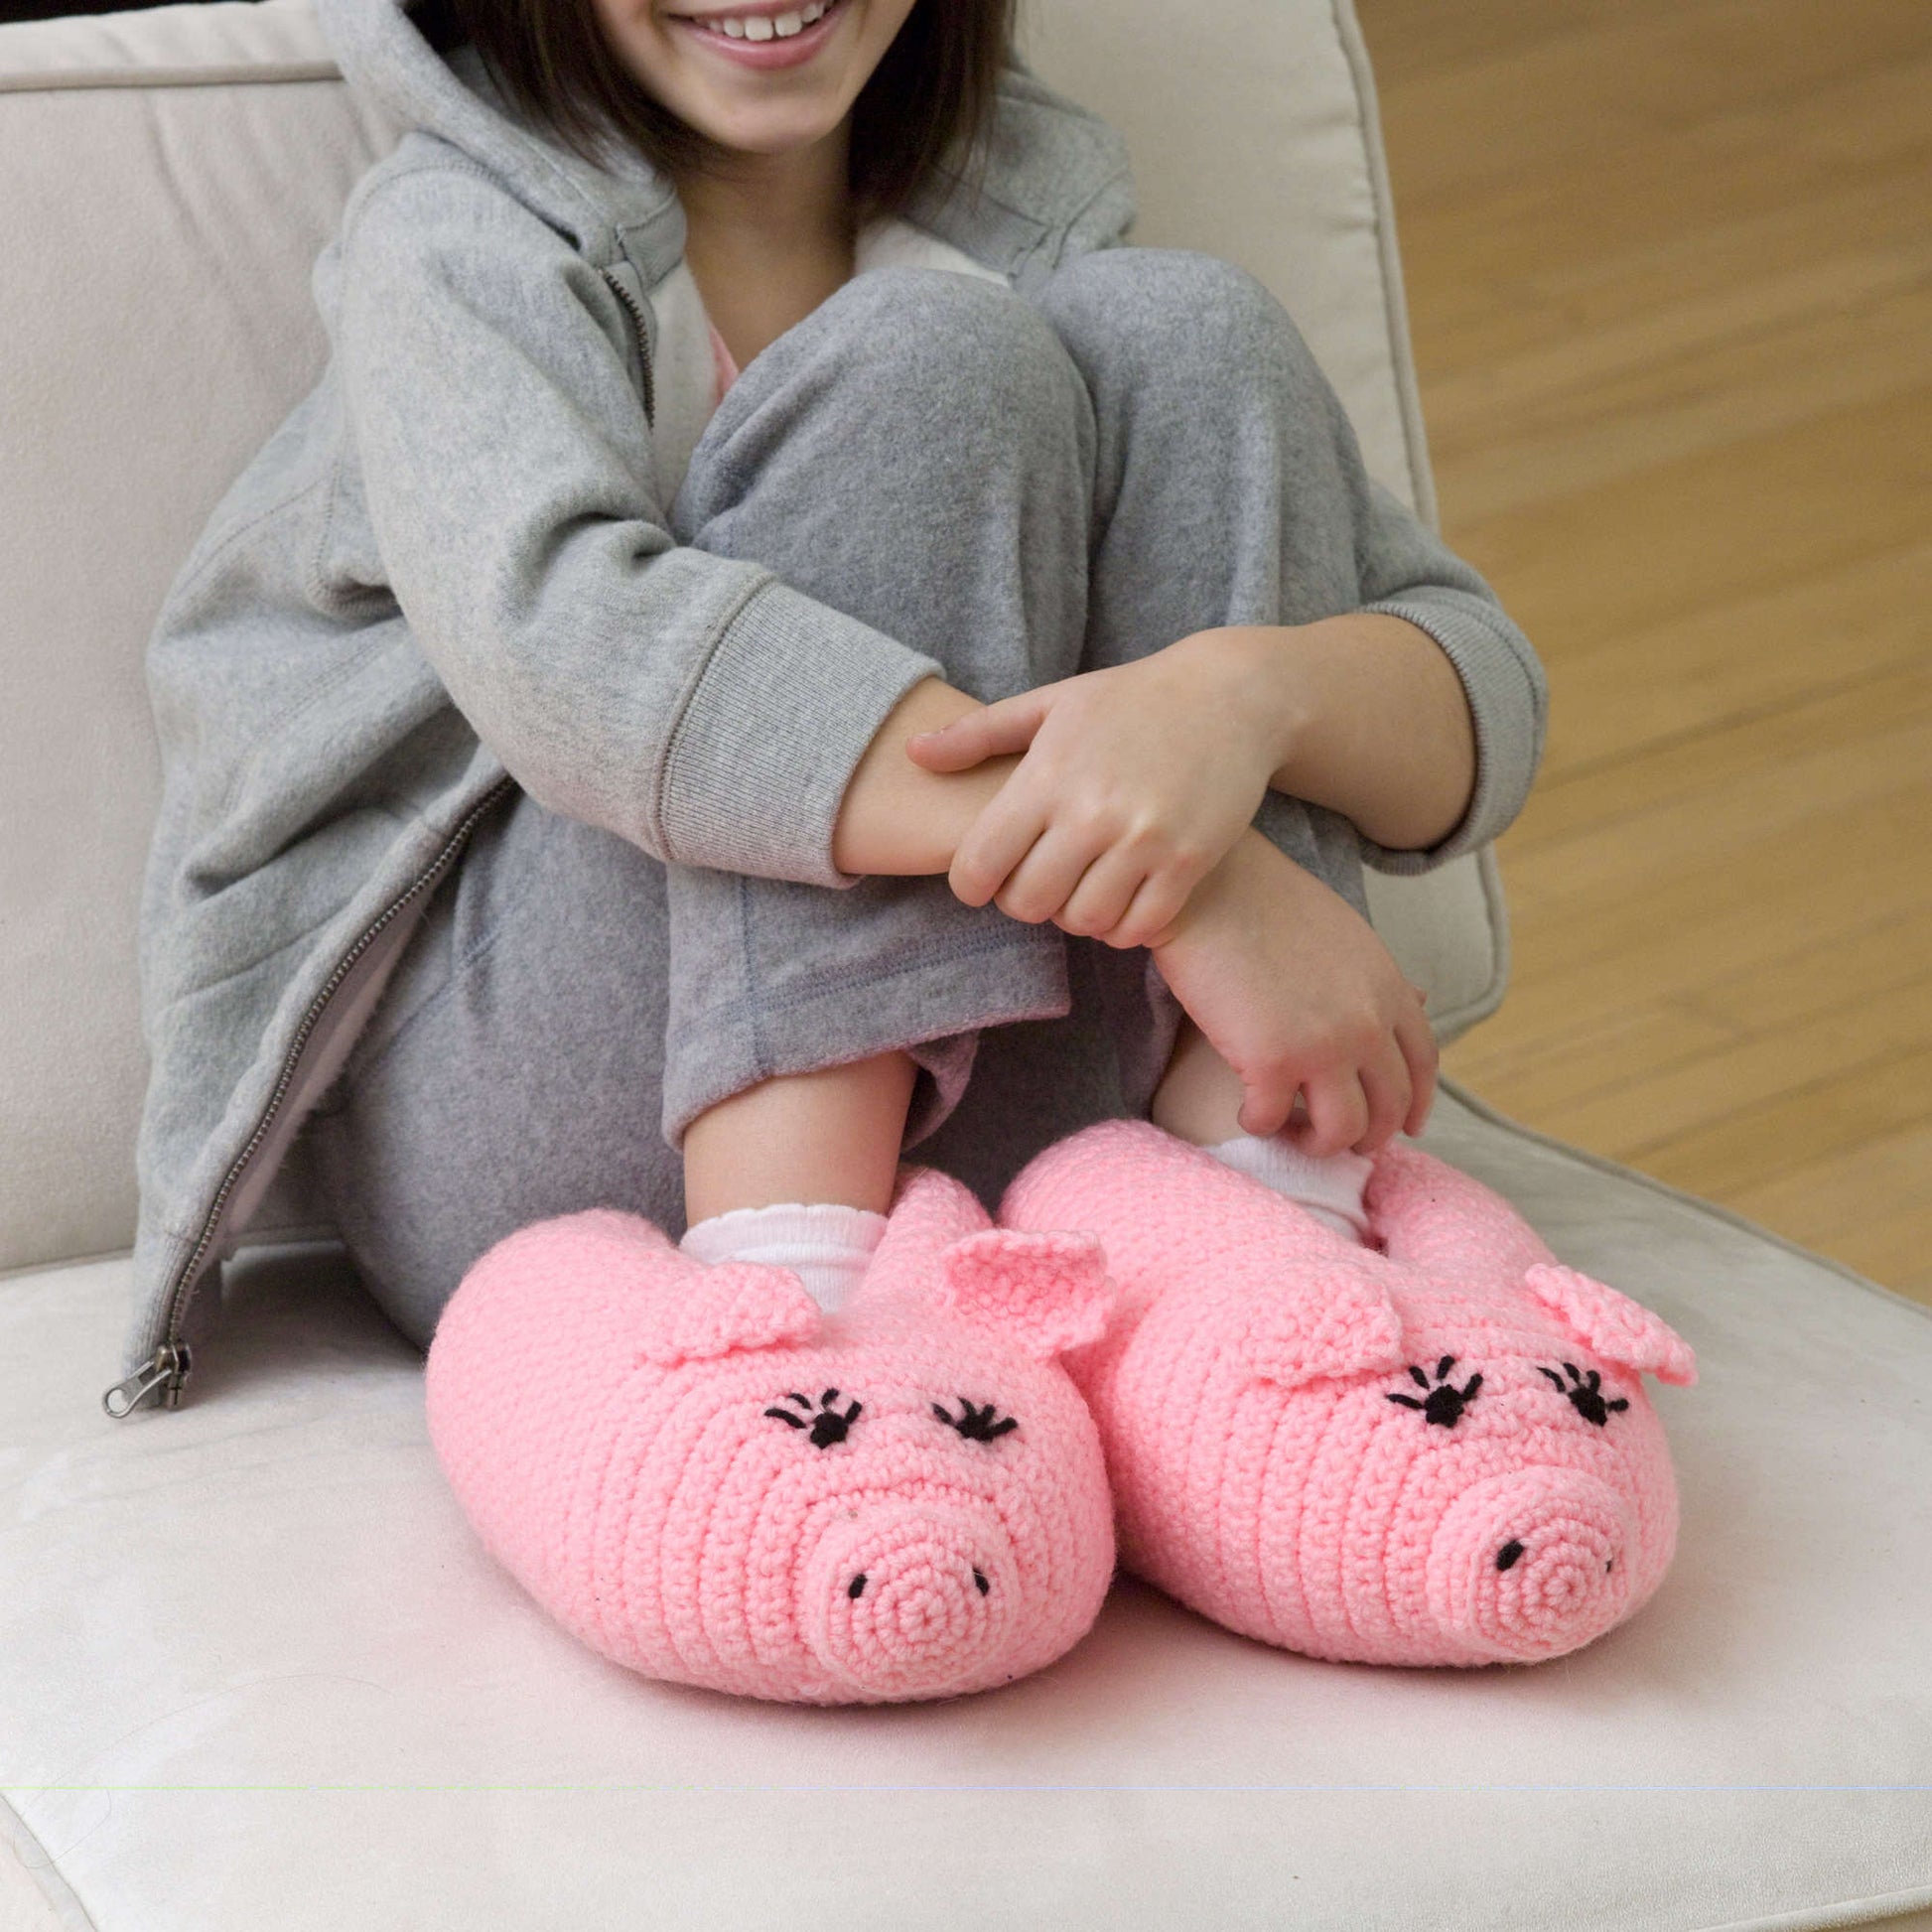 Free Red Heart Pudgy Piggy Slippers Crochet Pattern